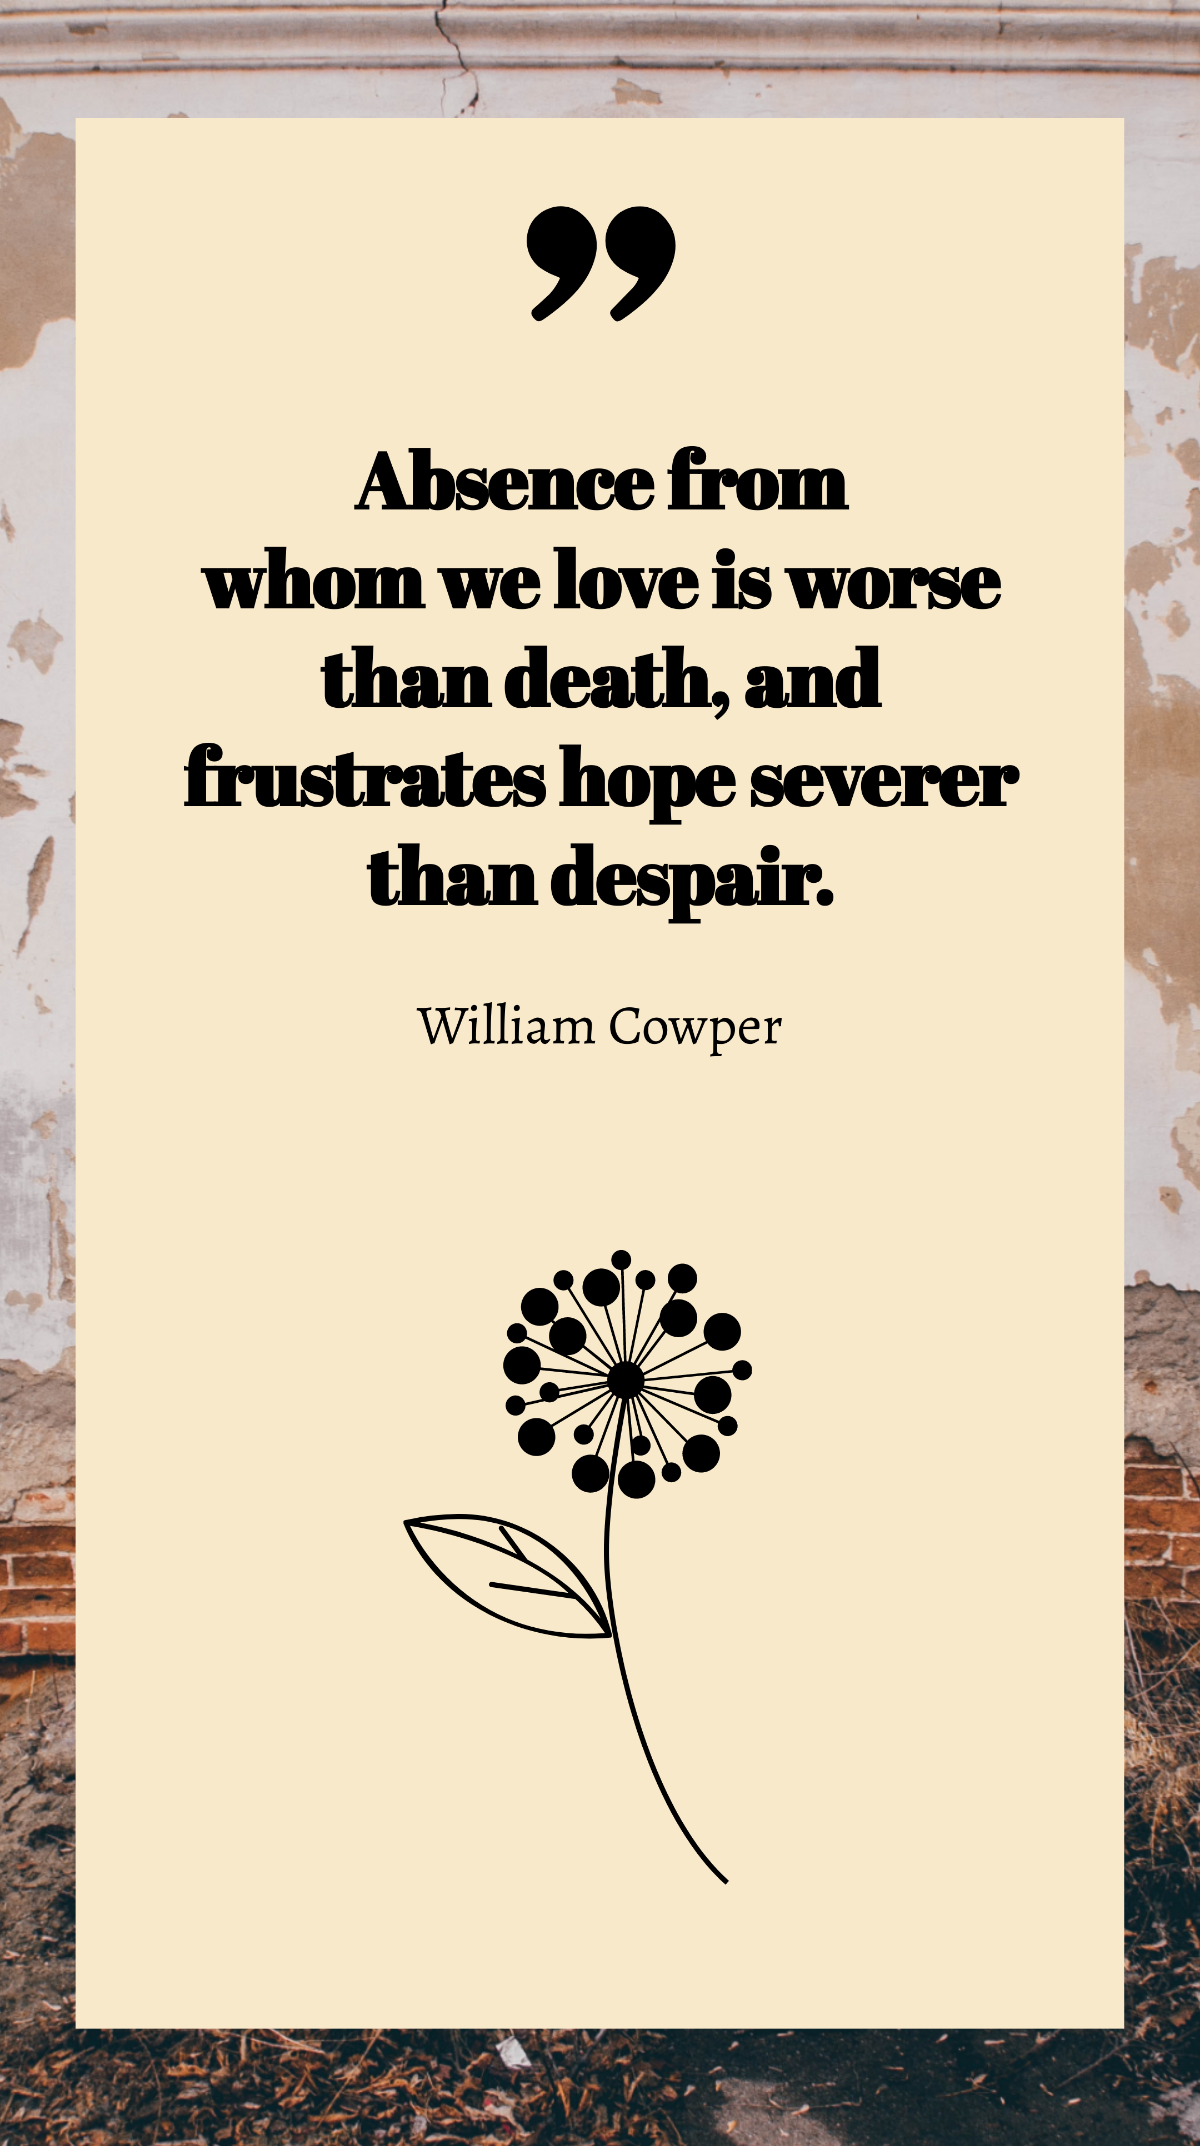 William Cowper - Absence from whom we love is worse than death, and frustrates hope severer than despair. Template